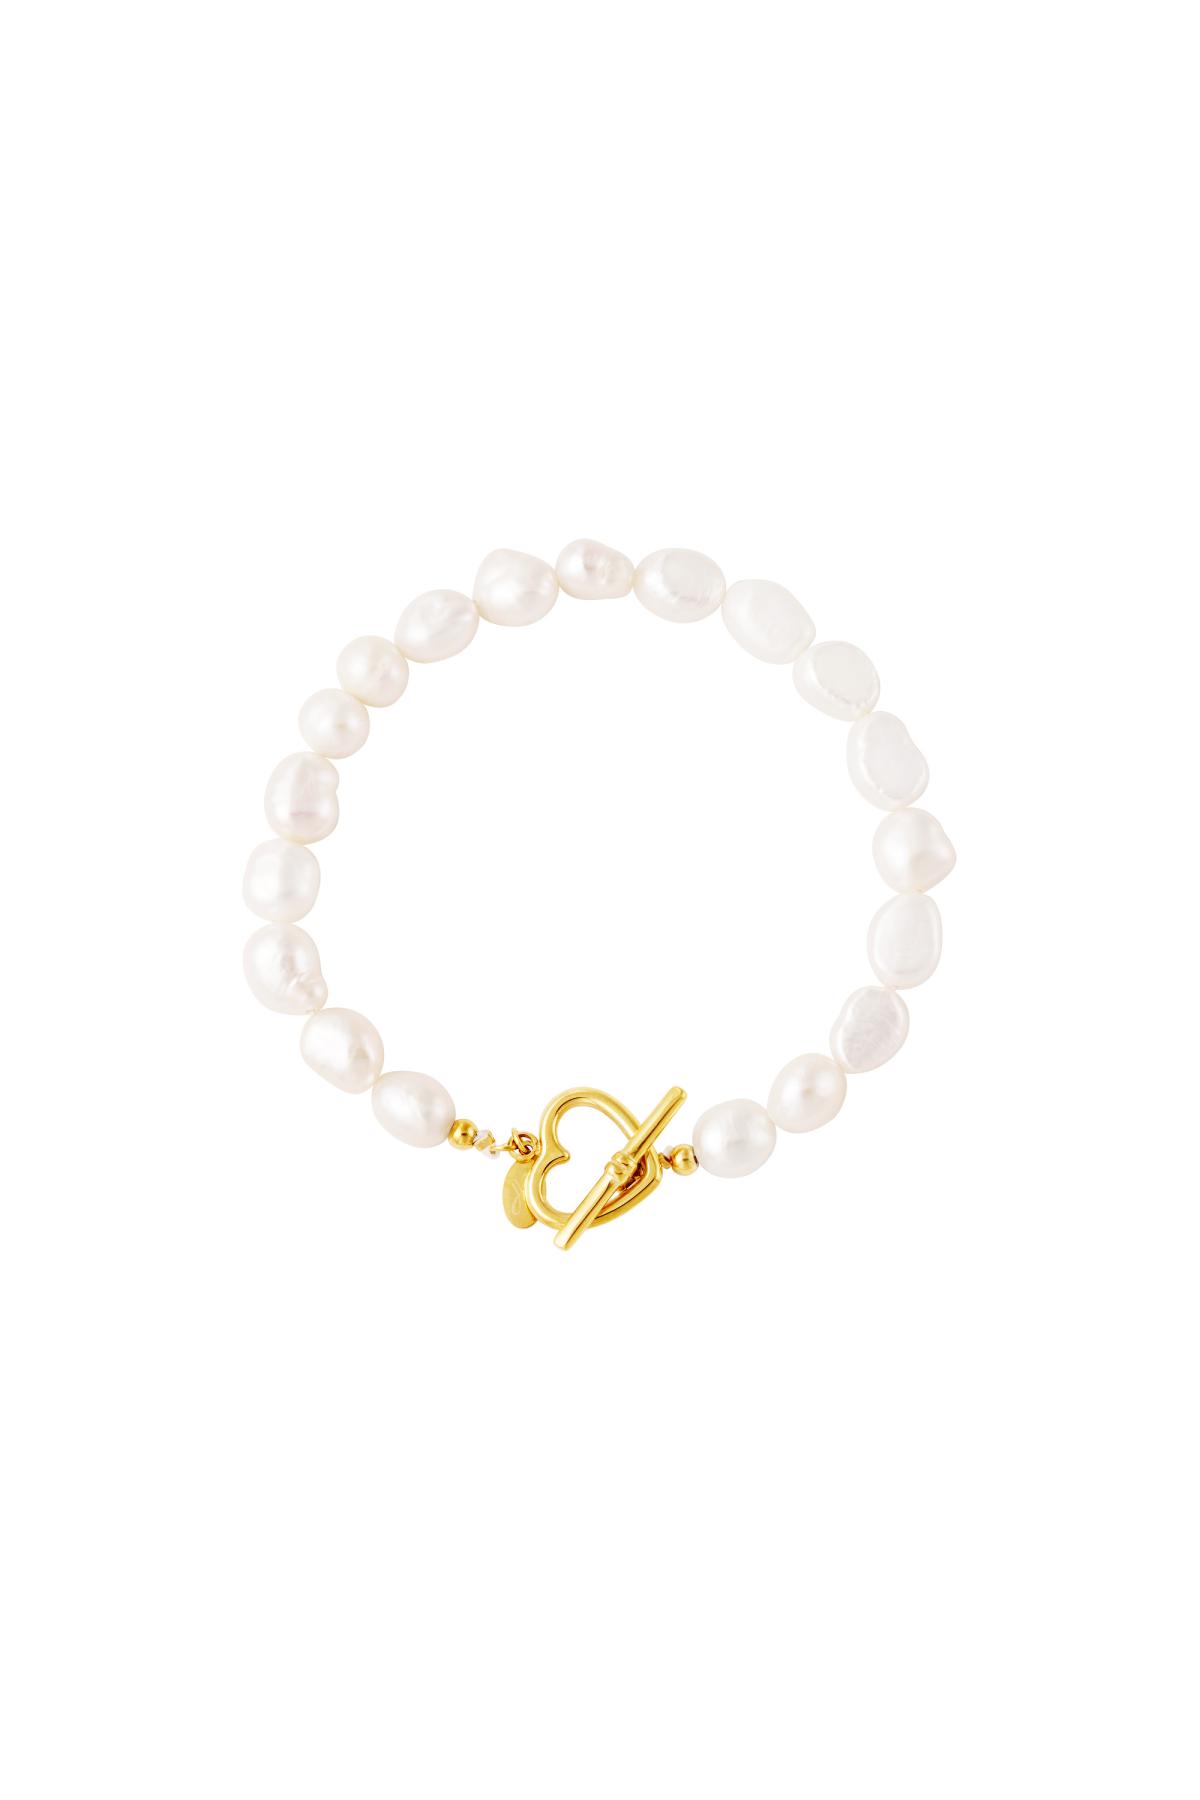 Bracelet pearl heart closure Gold Stainless Steel 